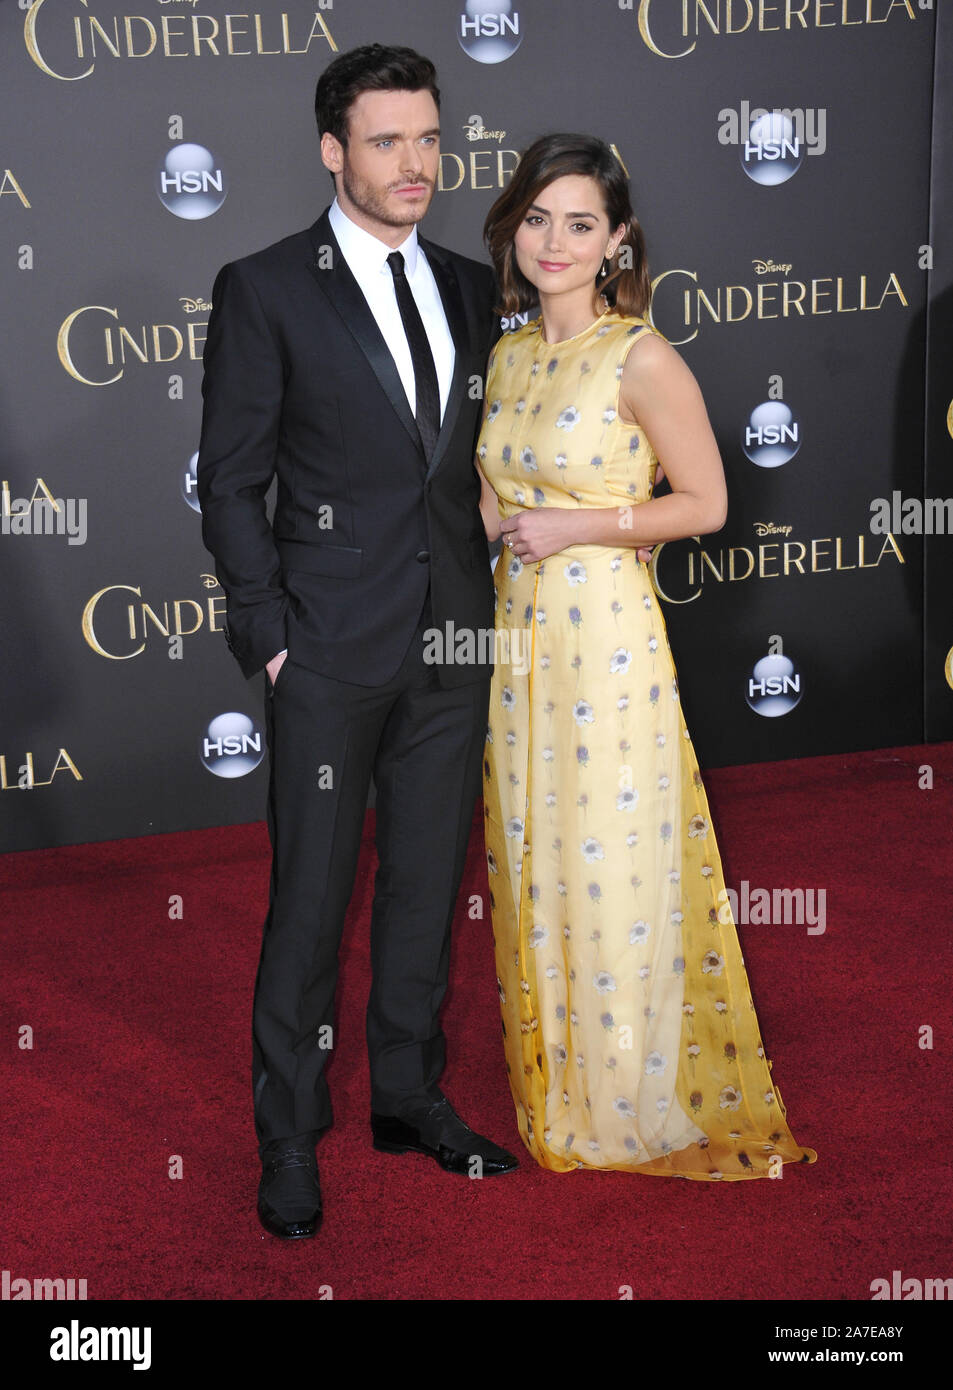 LOS ANGELES, CA - MARCH 1, 2015: Richard Madden & actress girlfriend Jenna Coleman at the world premiere of his movie 'Cinderella' at the El Capitan Theatre, Hollywood. © 2015 Paul Smith / Featureflash Stock Photo